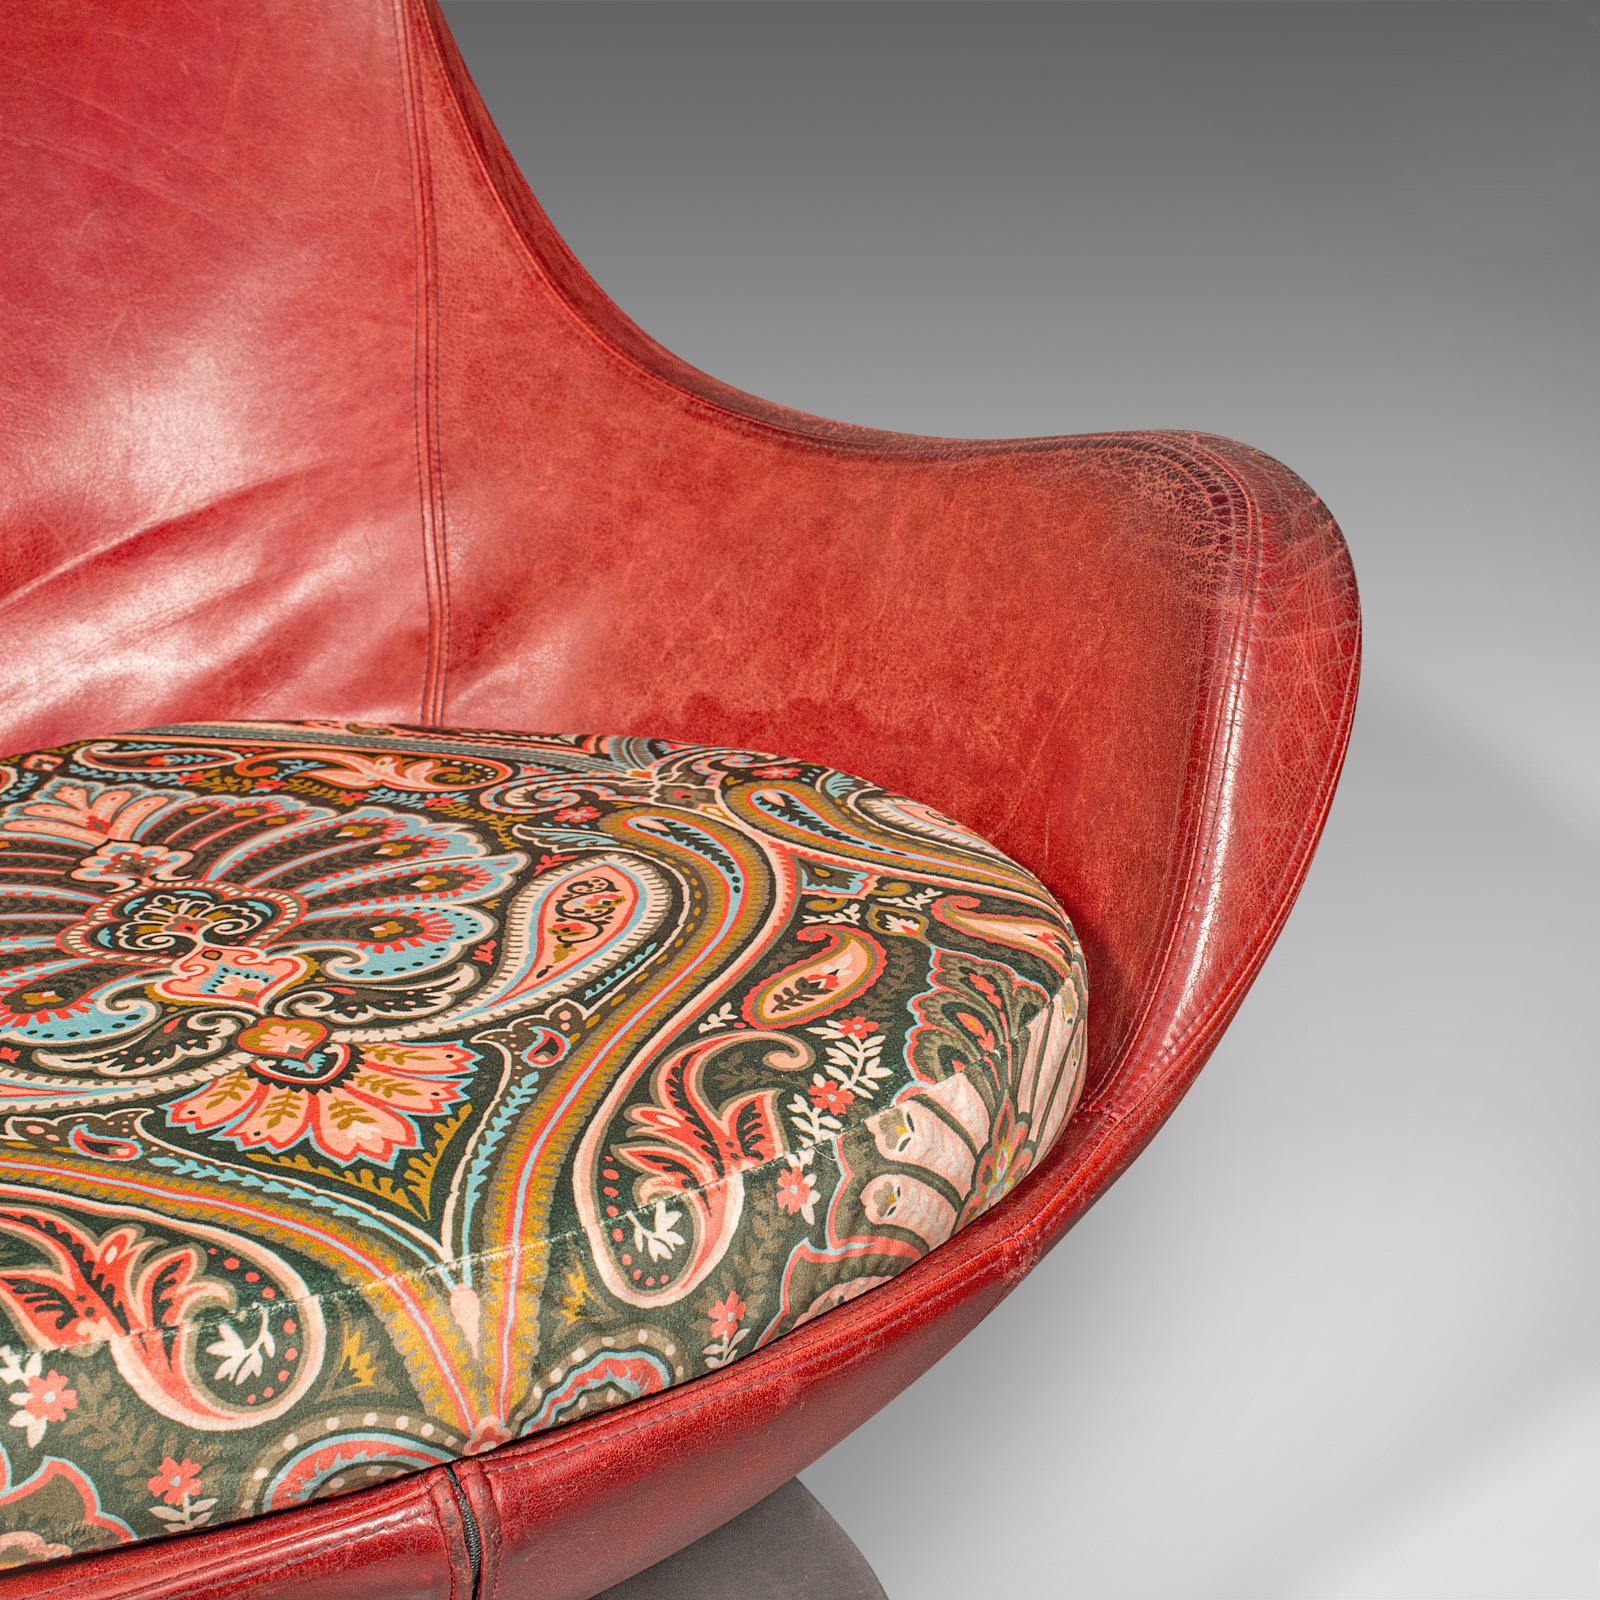 Vintage Swivel Tub Chair, Italian Leather Lounge Seat, Late 20th Century, C.1970 For Sale 5